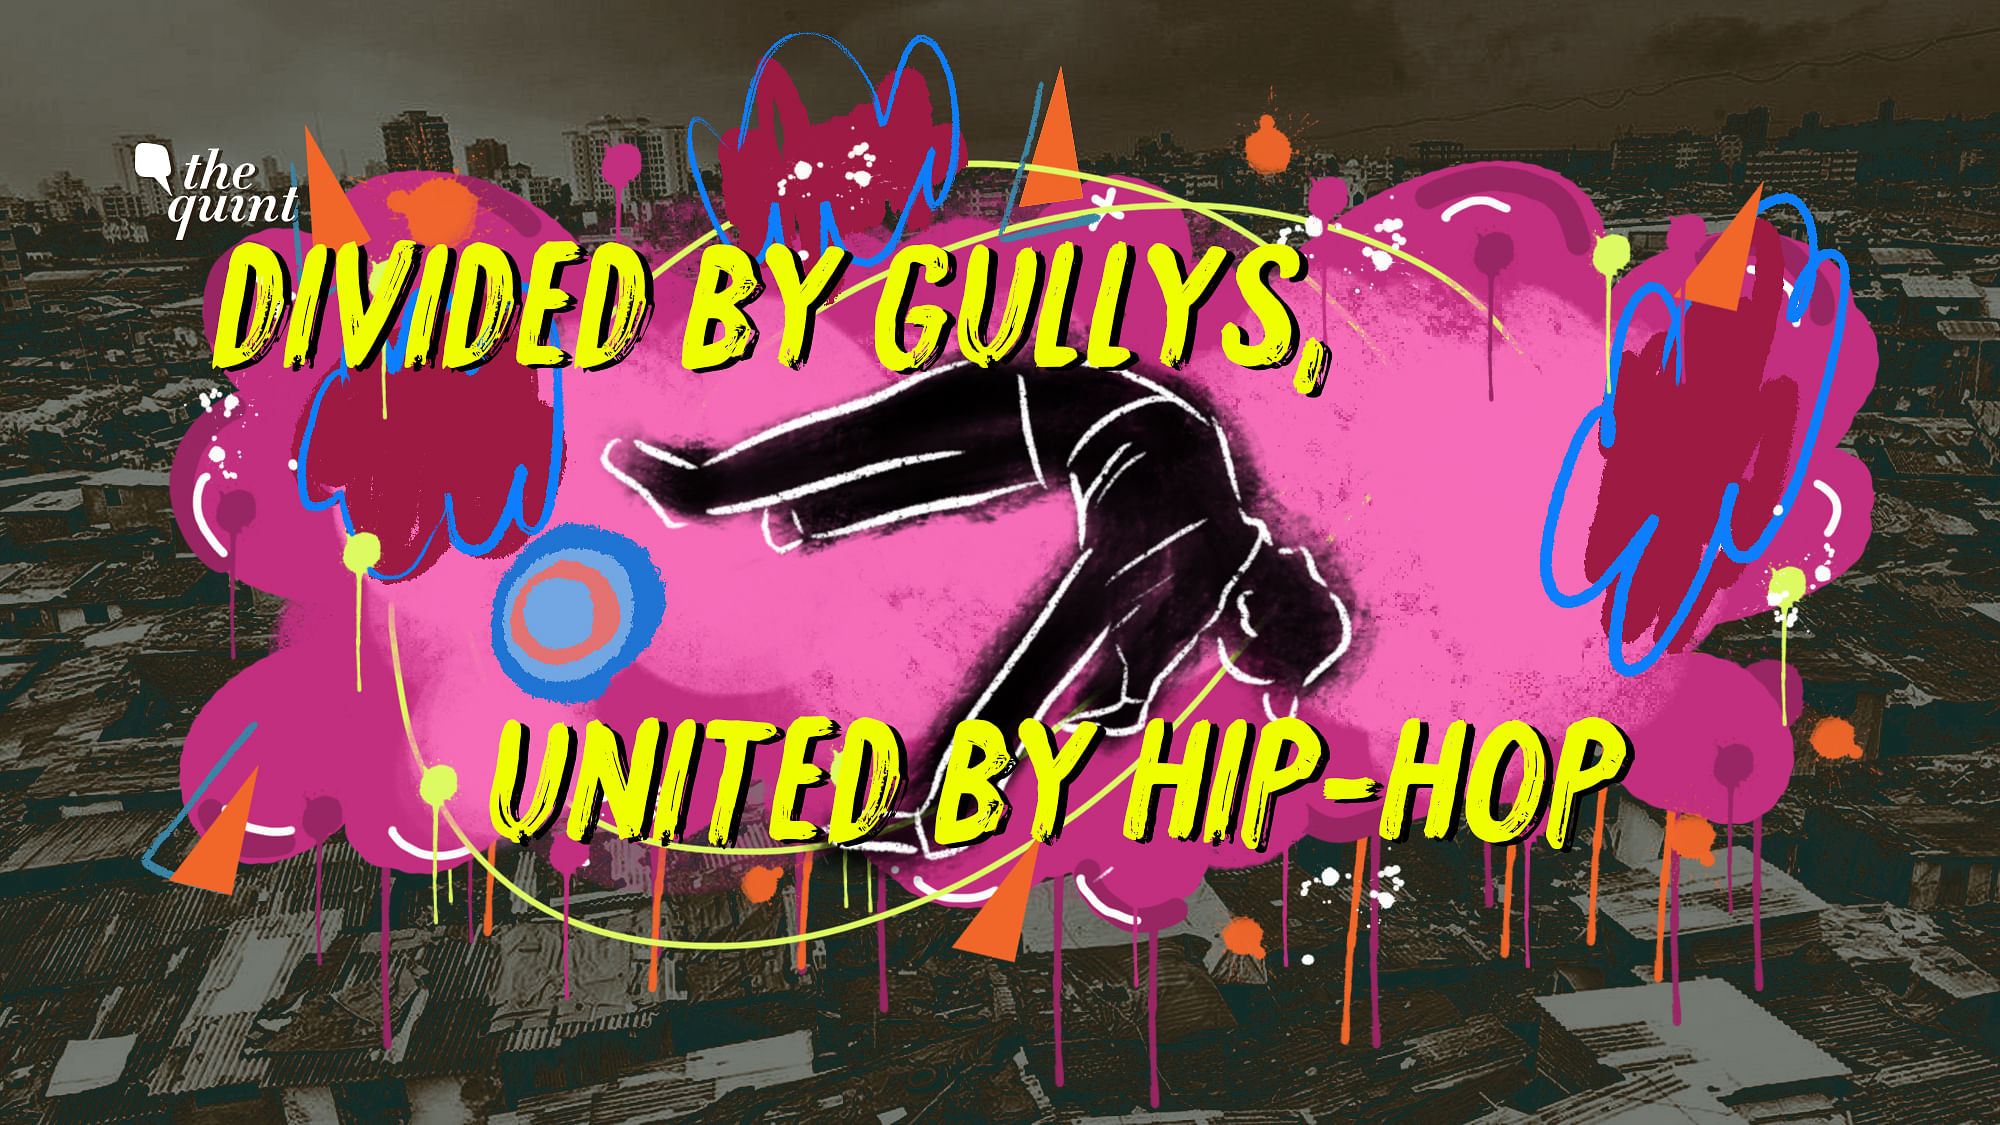 Divided by gullys, united by hip-hop